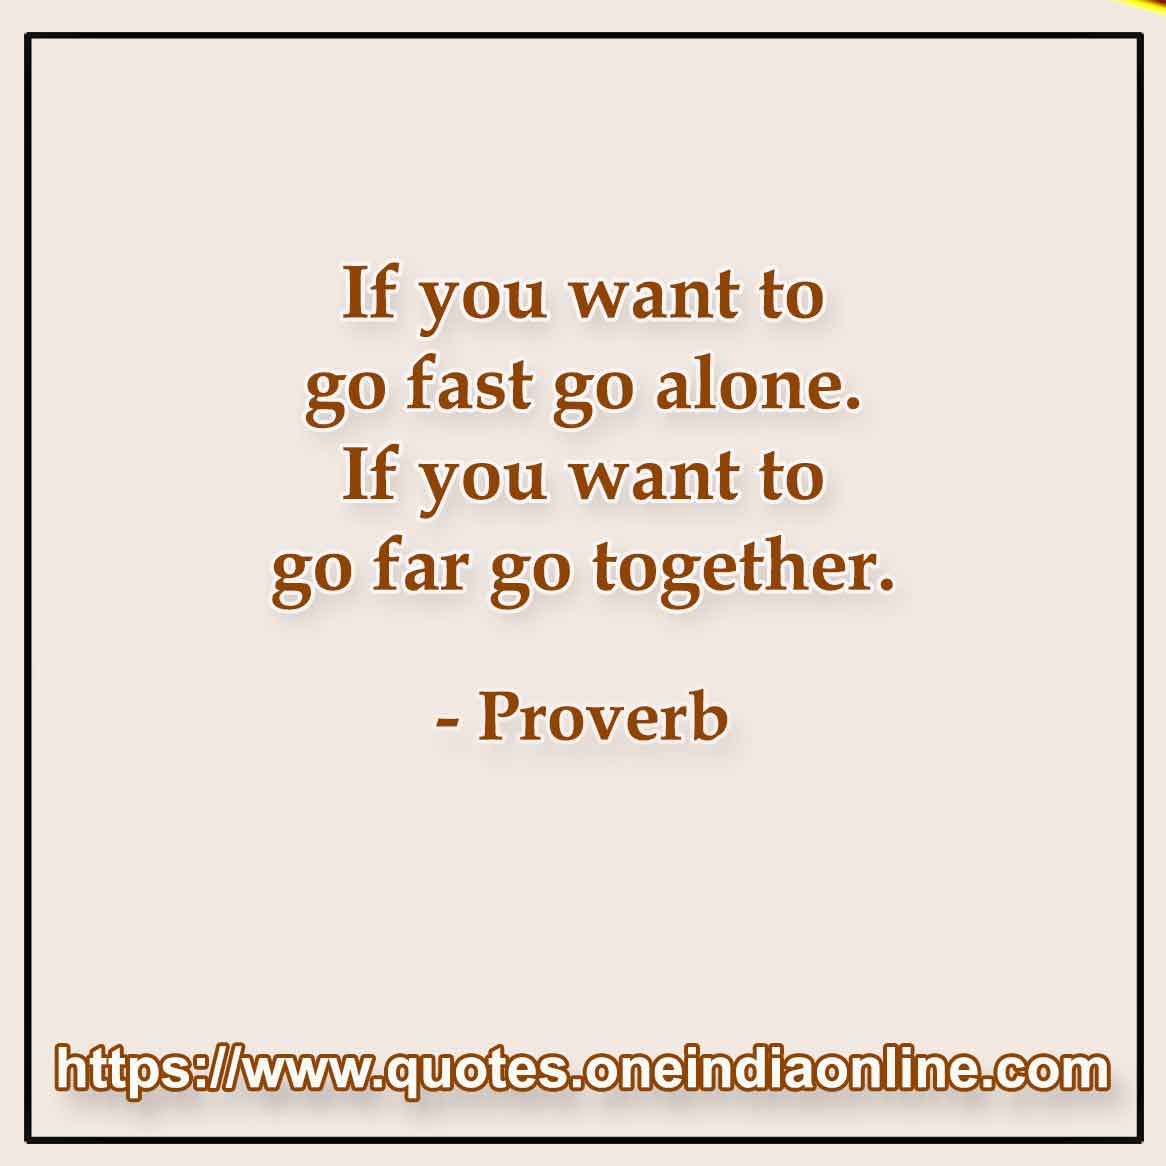 If you want to go fast go alone. If you want to go far go together.

- African